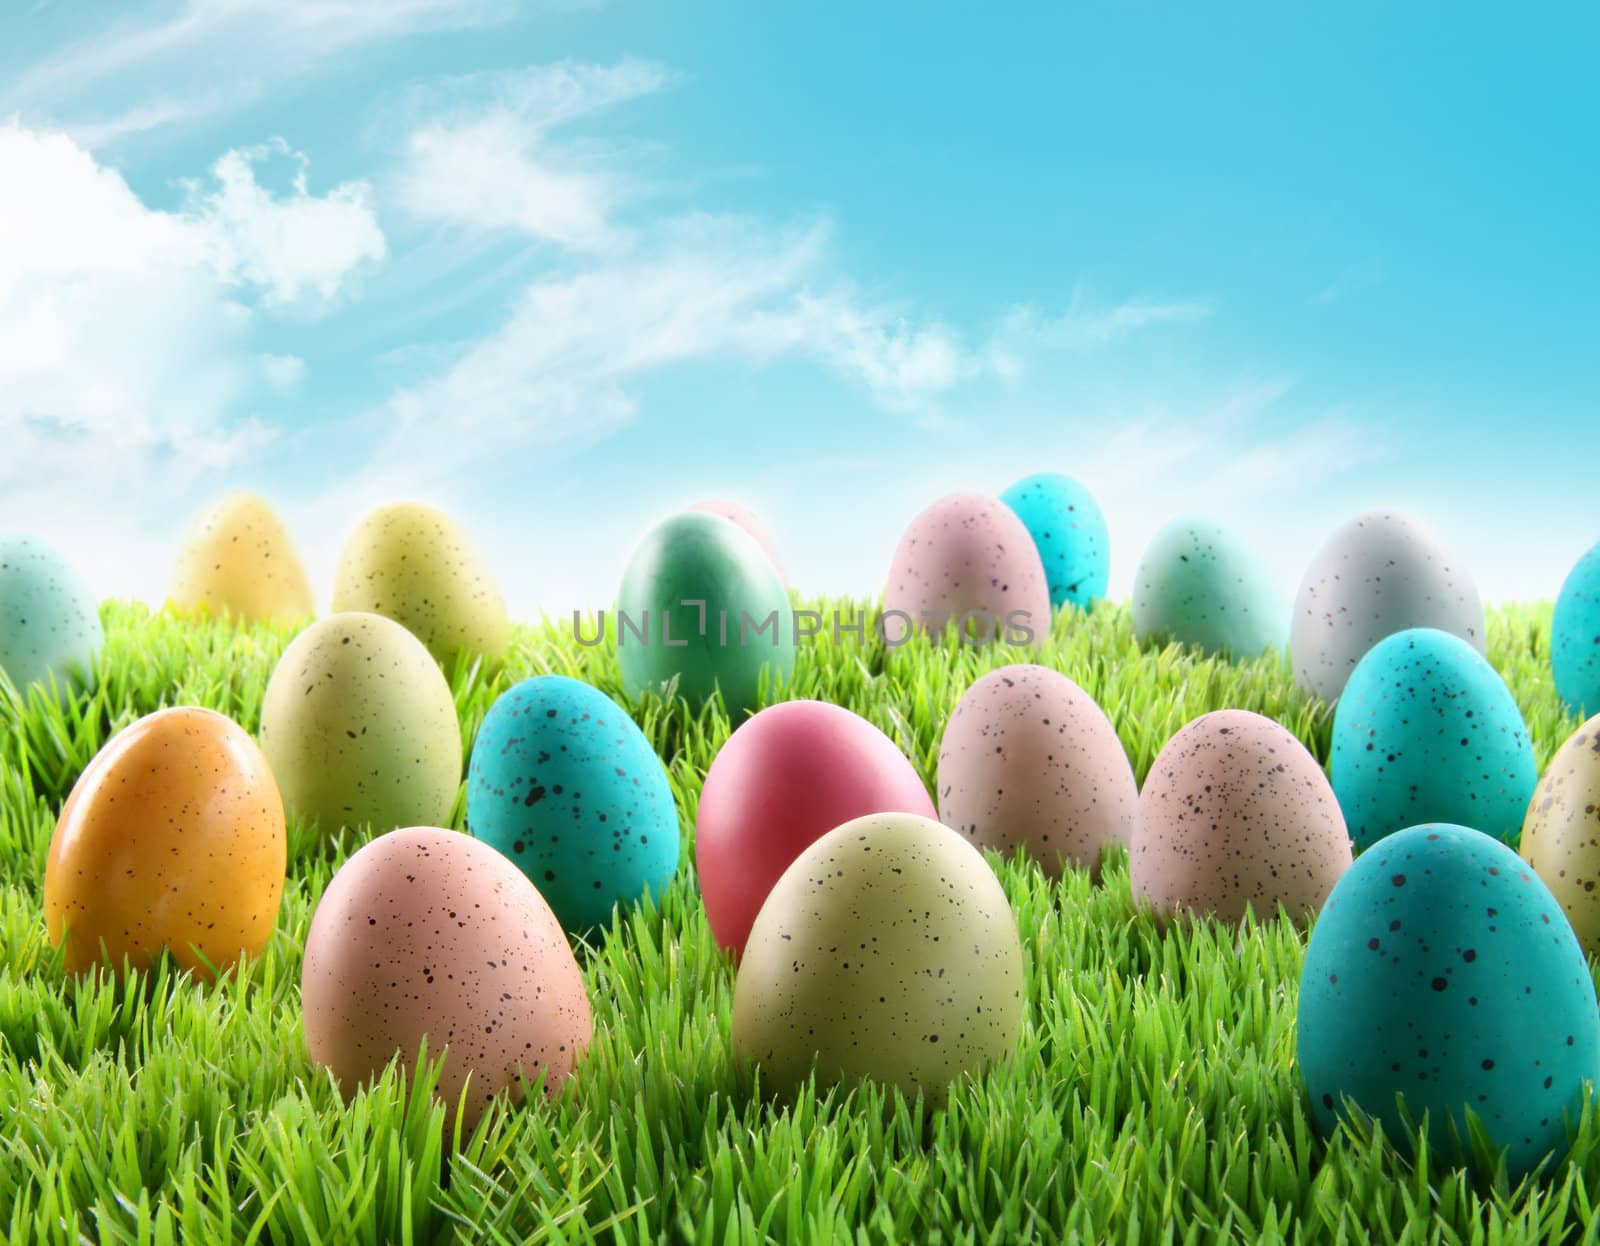 Colorful Easter eggs in a field of grass by Sandralise